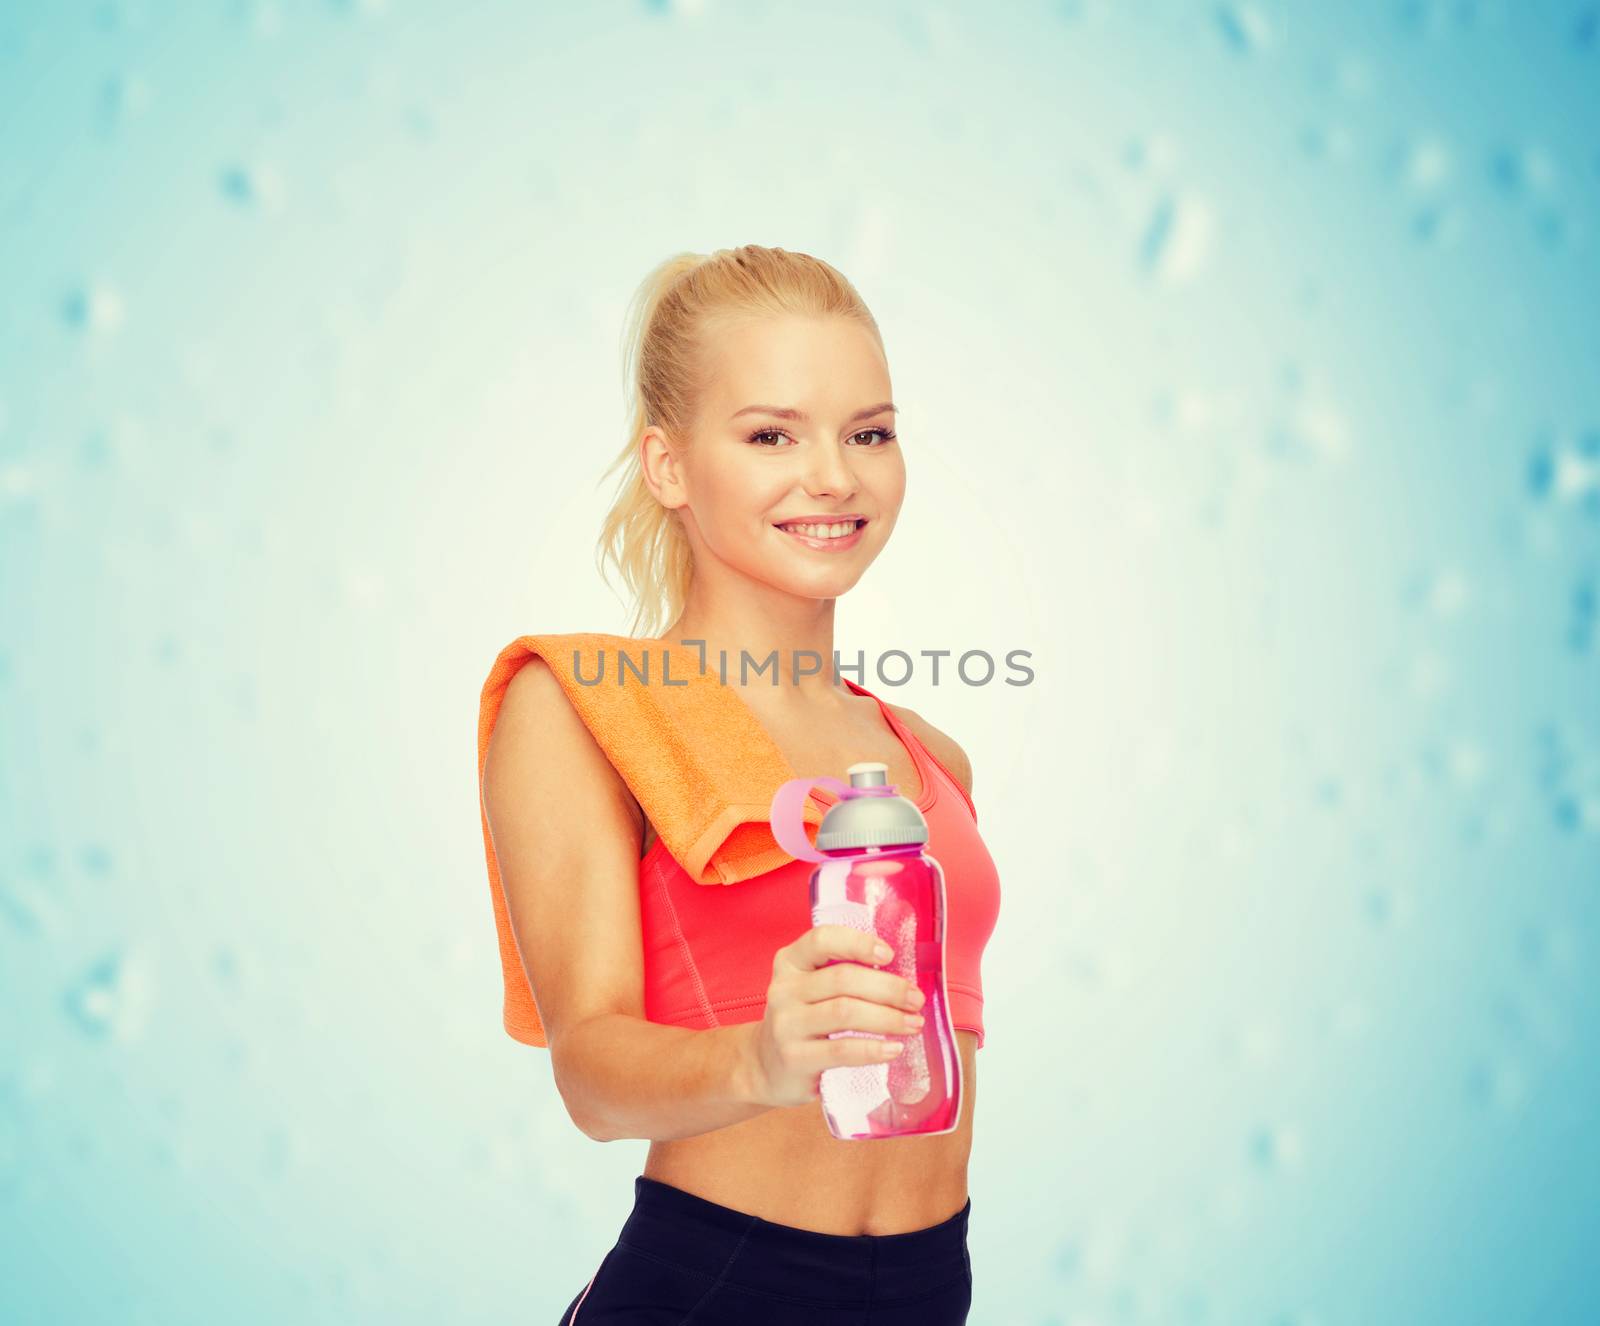 sport, exercise and healthcare - sporty woman with orange towel and water bottle